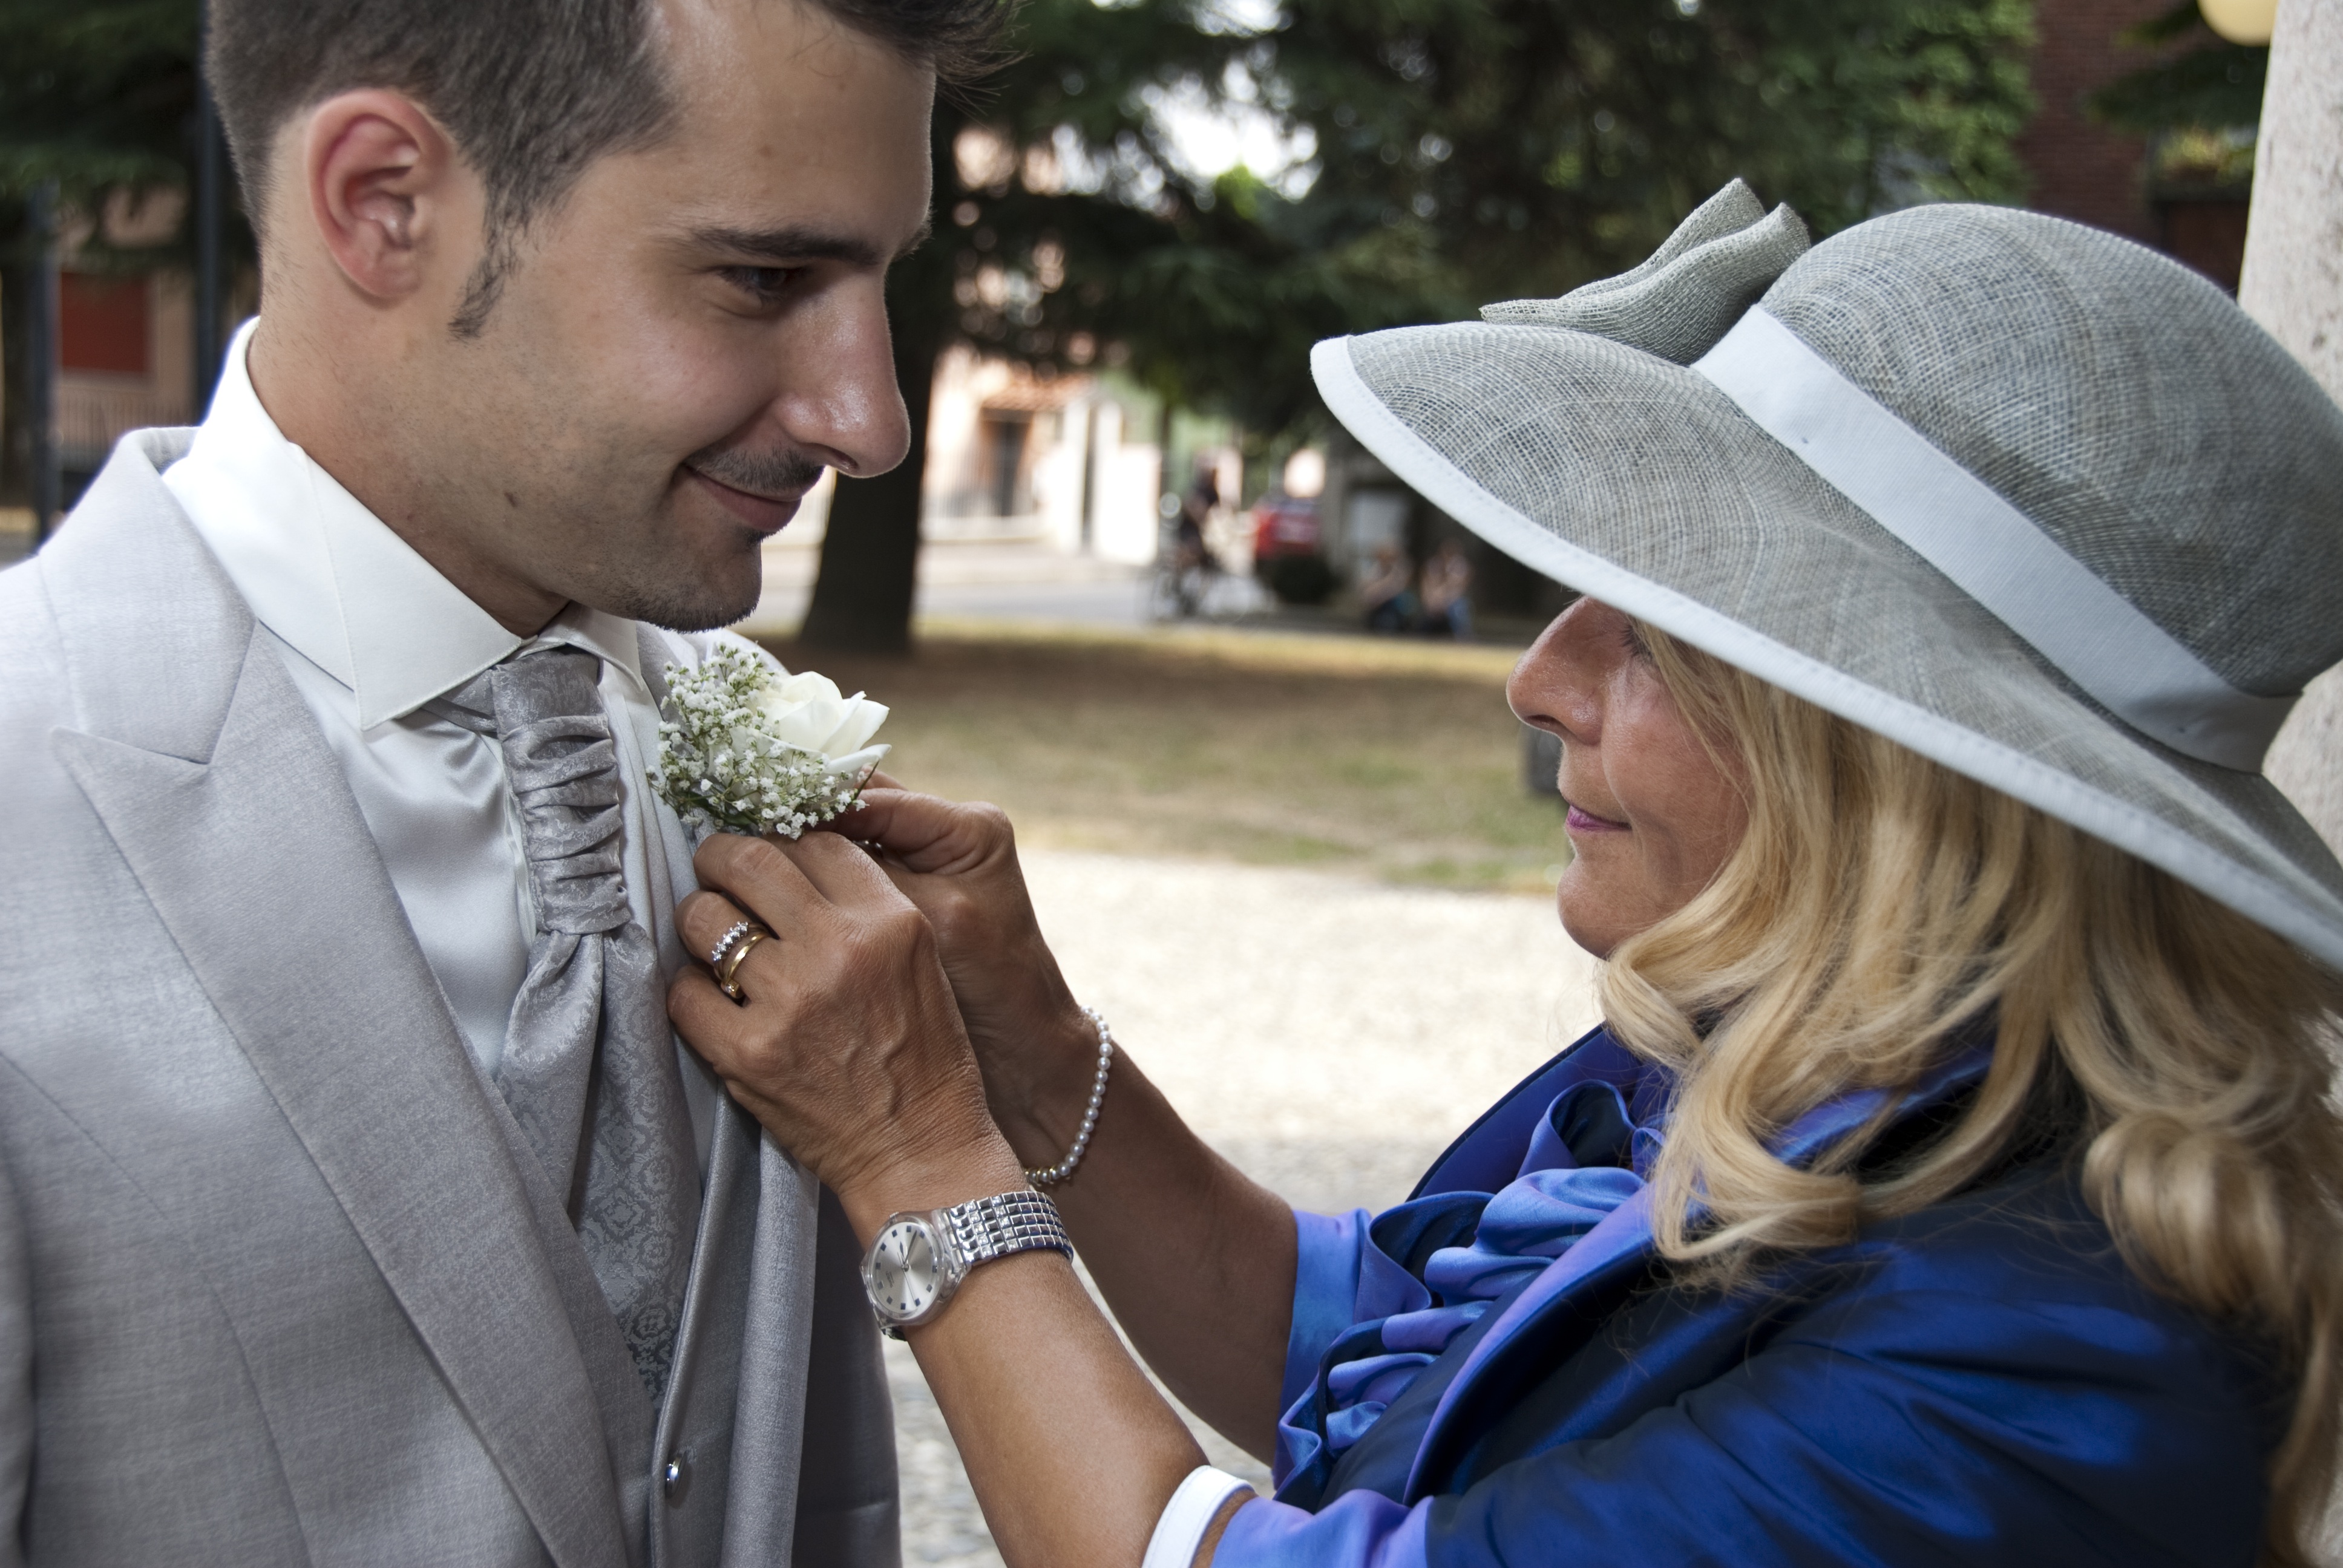 A mother fixing the boutonniere on her son's wedding suit.  From https://emilypost.com/advice/wedding-attire-tips-for-the-moms